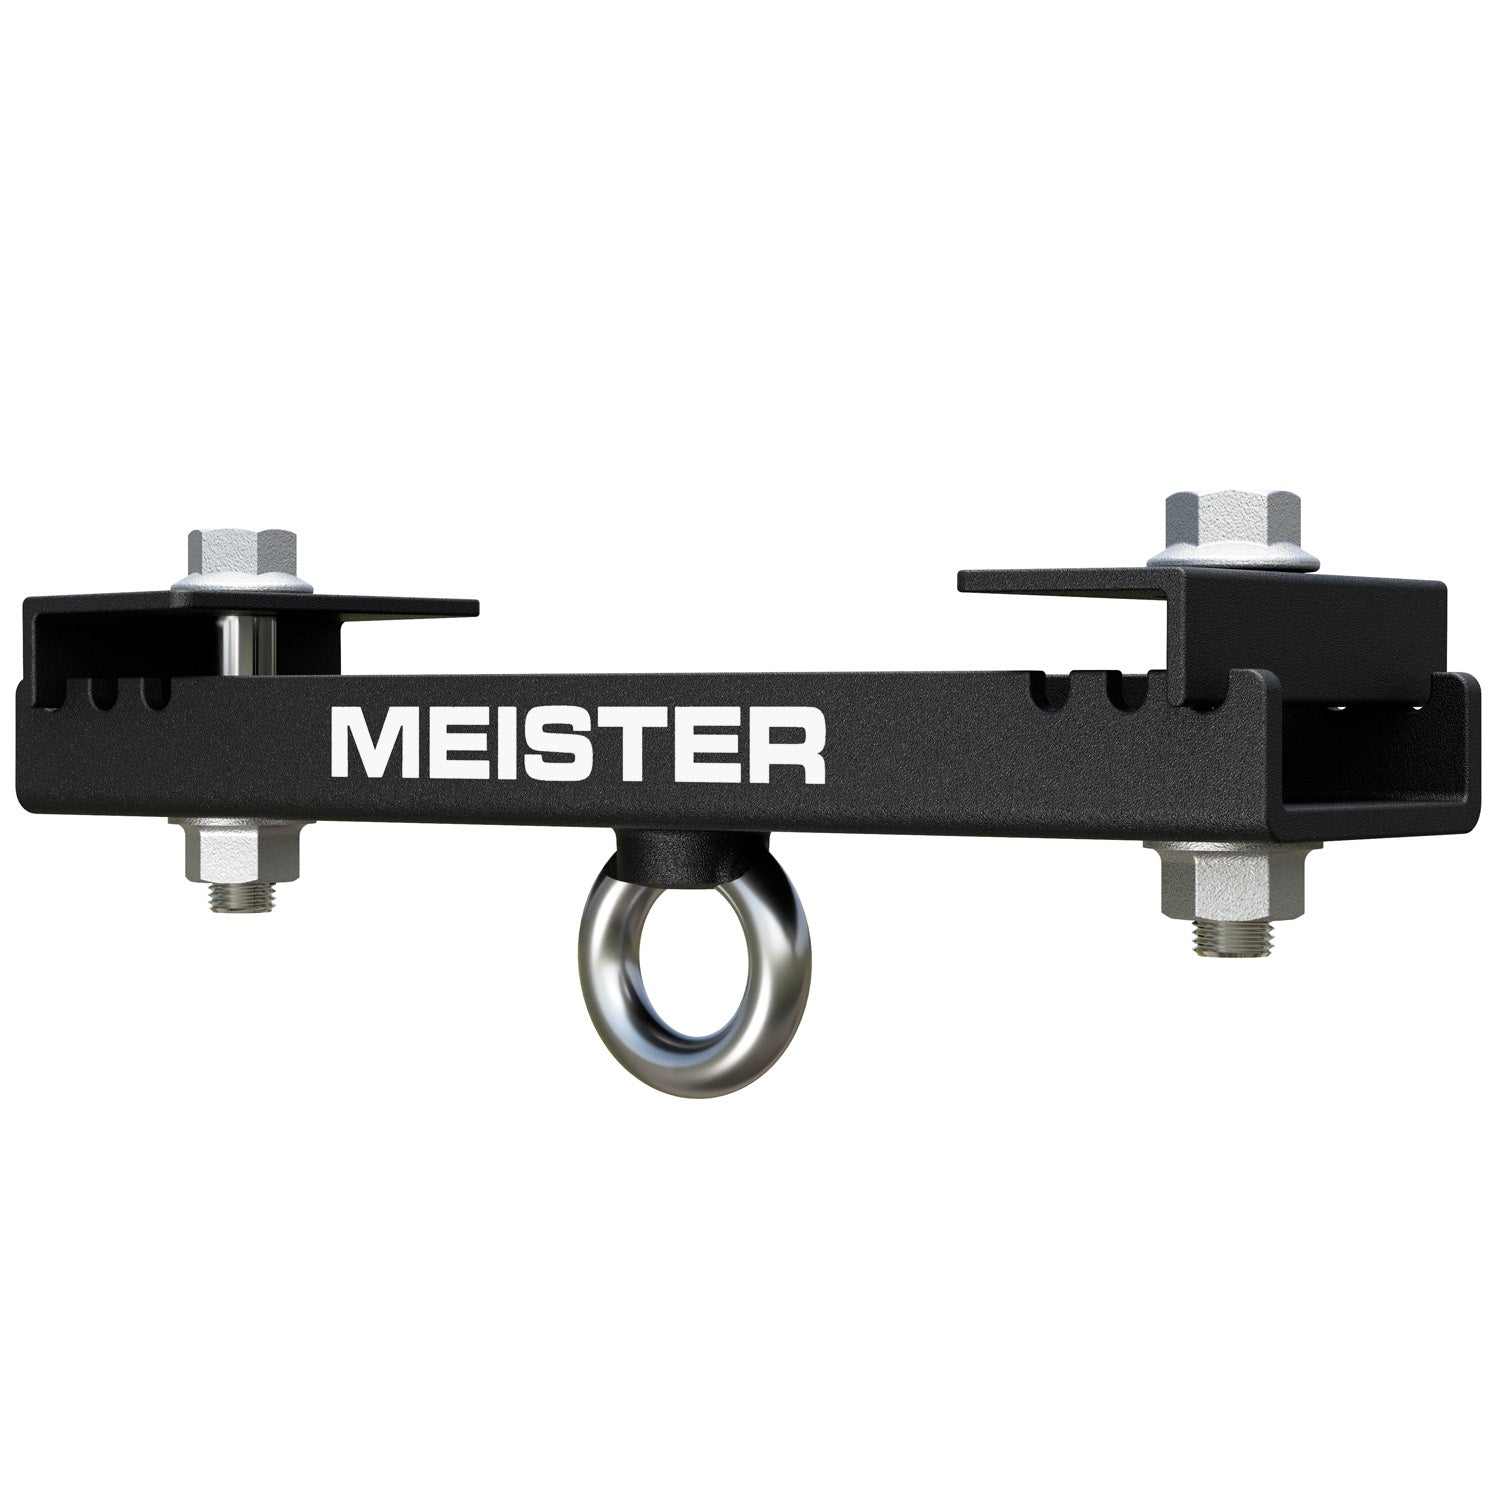 Meister Beam Clamp Hanger Mount for I-Beams & H-Beams